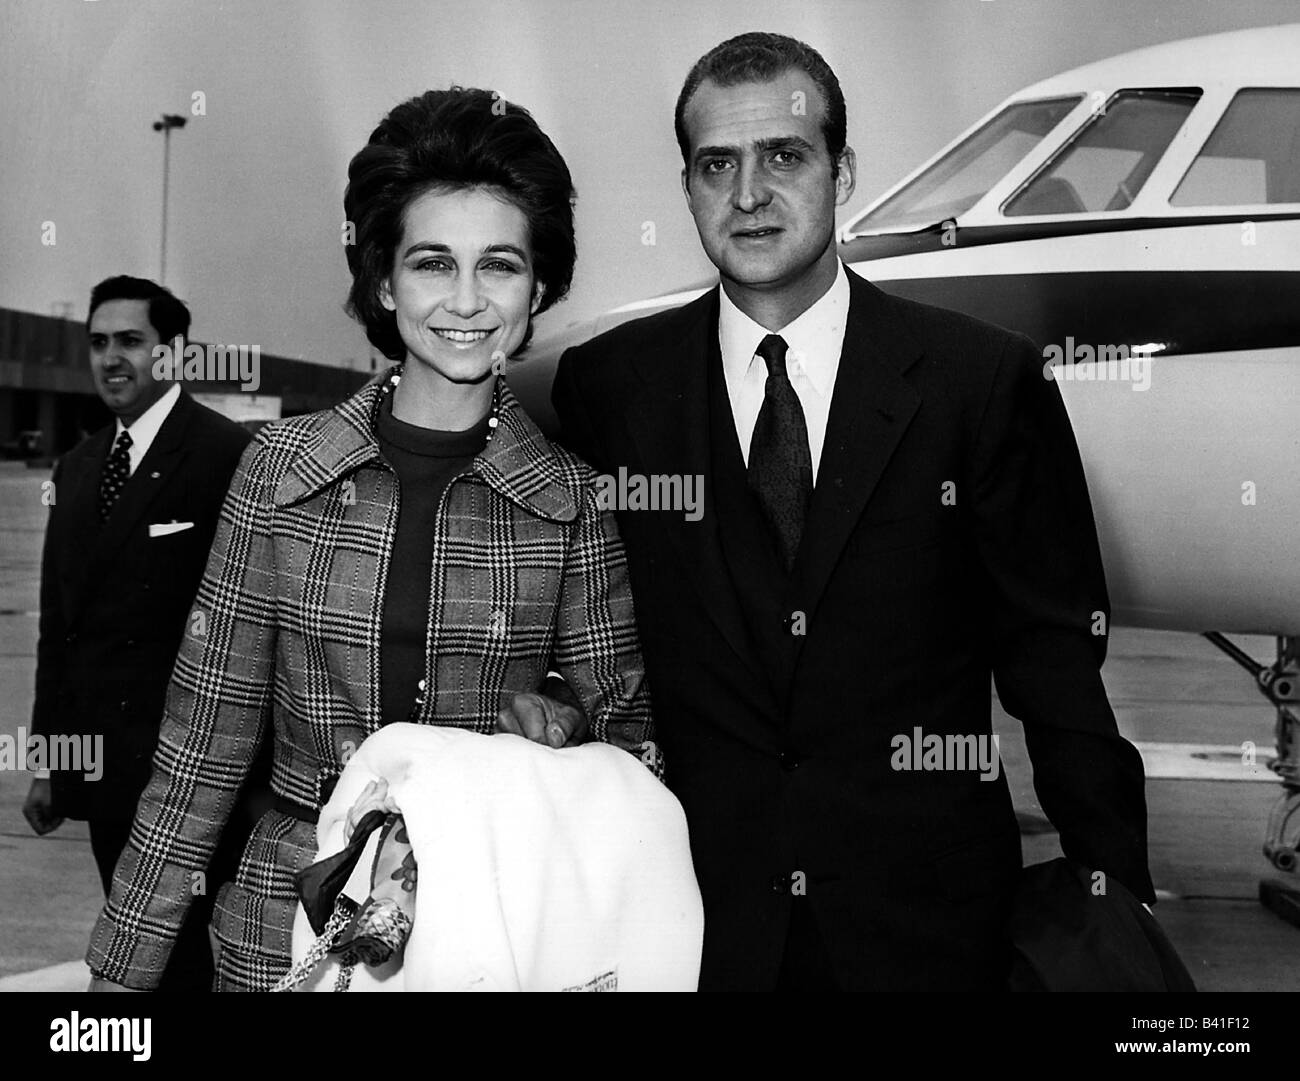 Juan Carlos I, * 5.1.1938, King of Spain since 22.11.1975, half length, with wife Sophia, at airport London, June 1970, Stock Photo